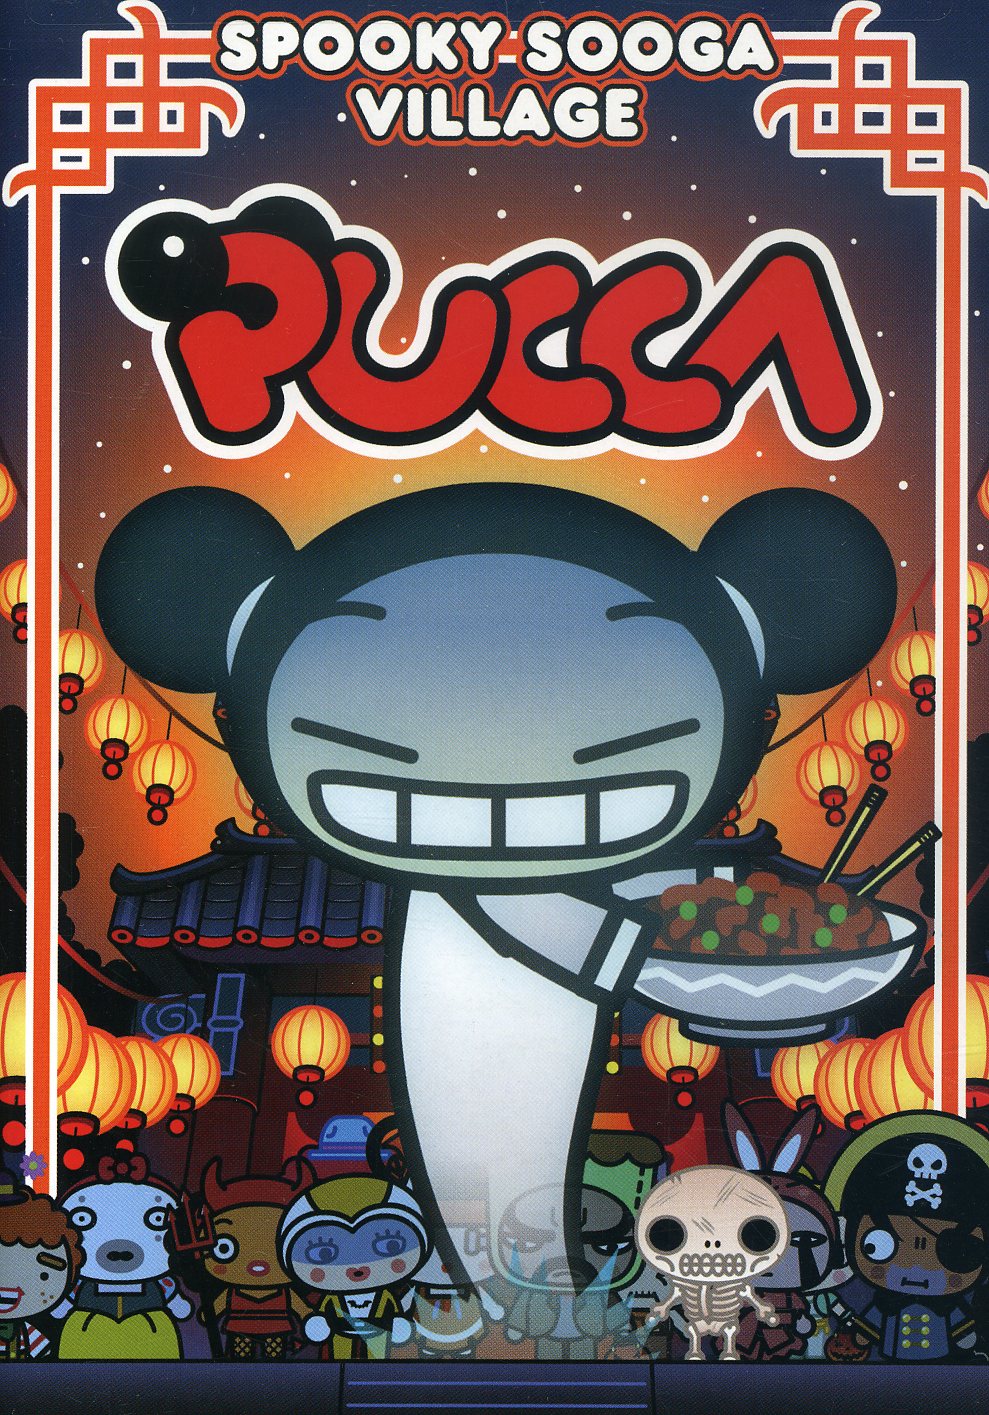 PUCCA: SPOOKY SOOGA VILLAGE / (COL FULL)